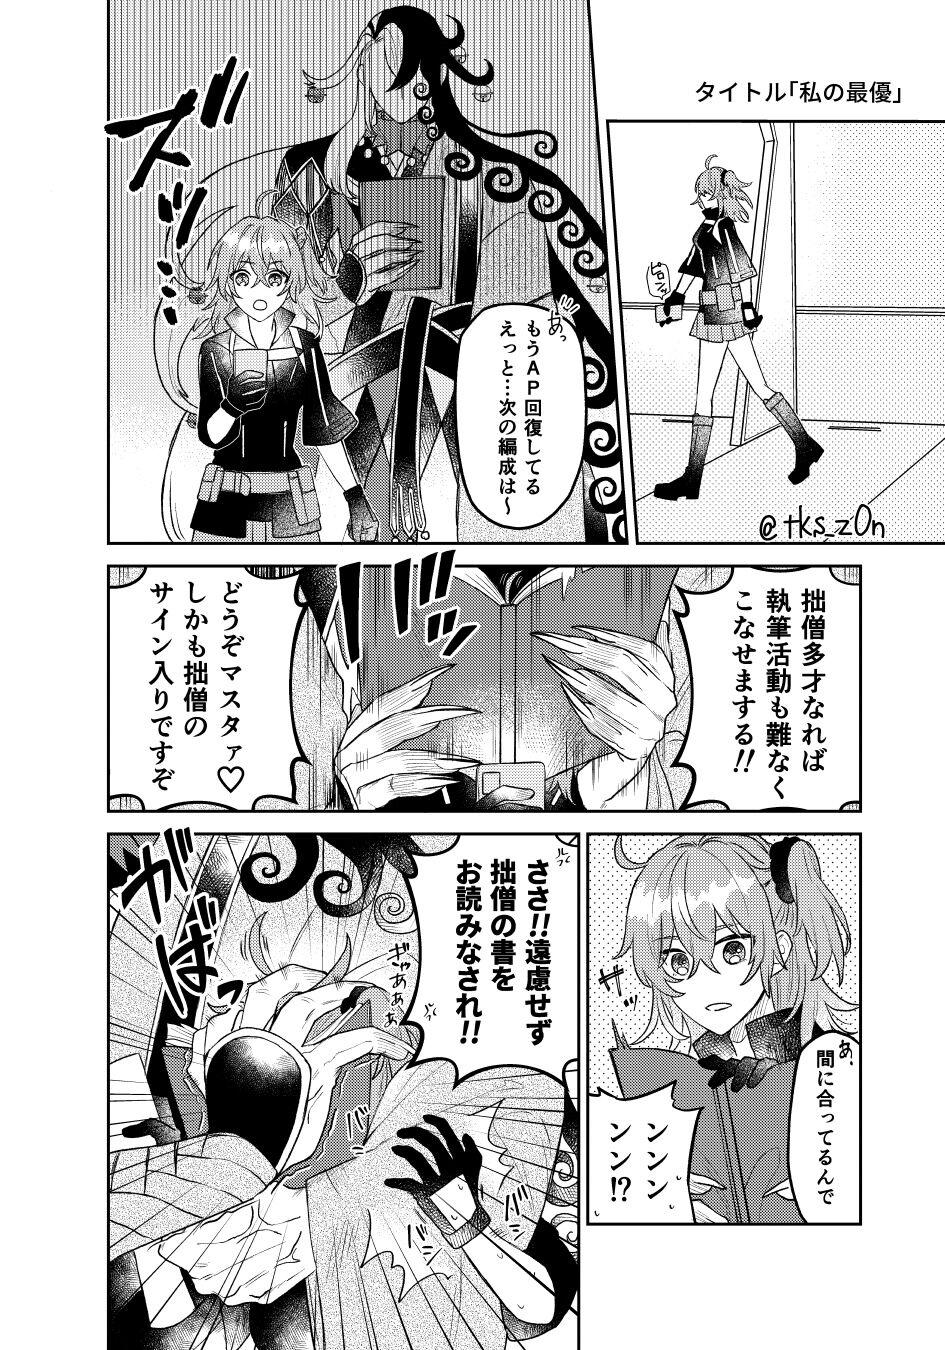 Young Old ][Rin guda ♀ matome[ fate grand order ) - Fate grand order Highheels - Page 8